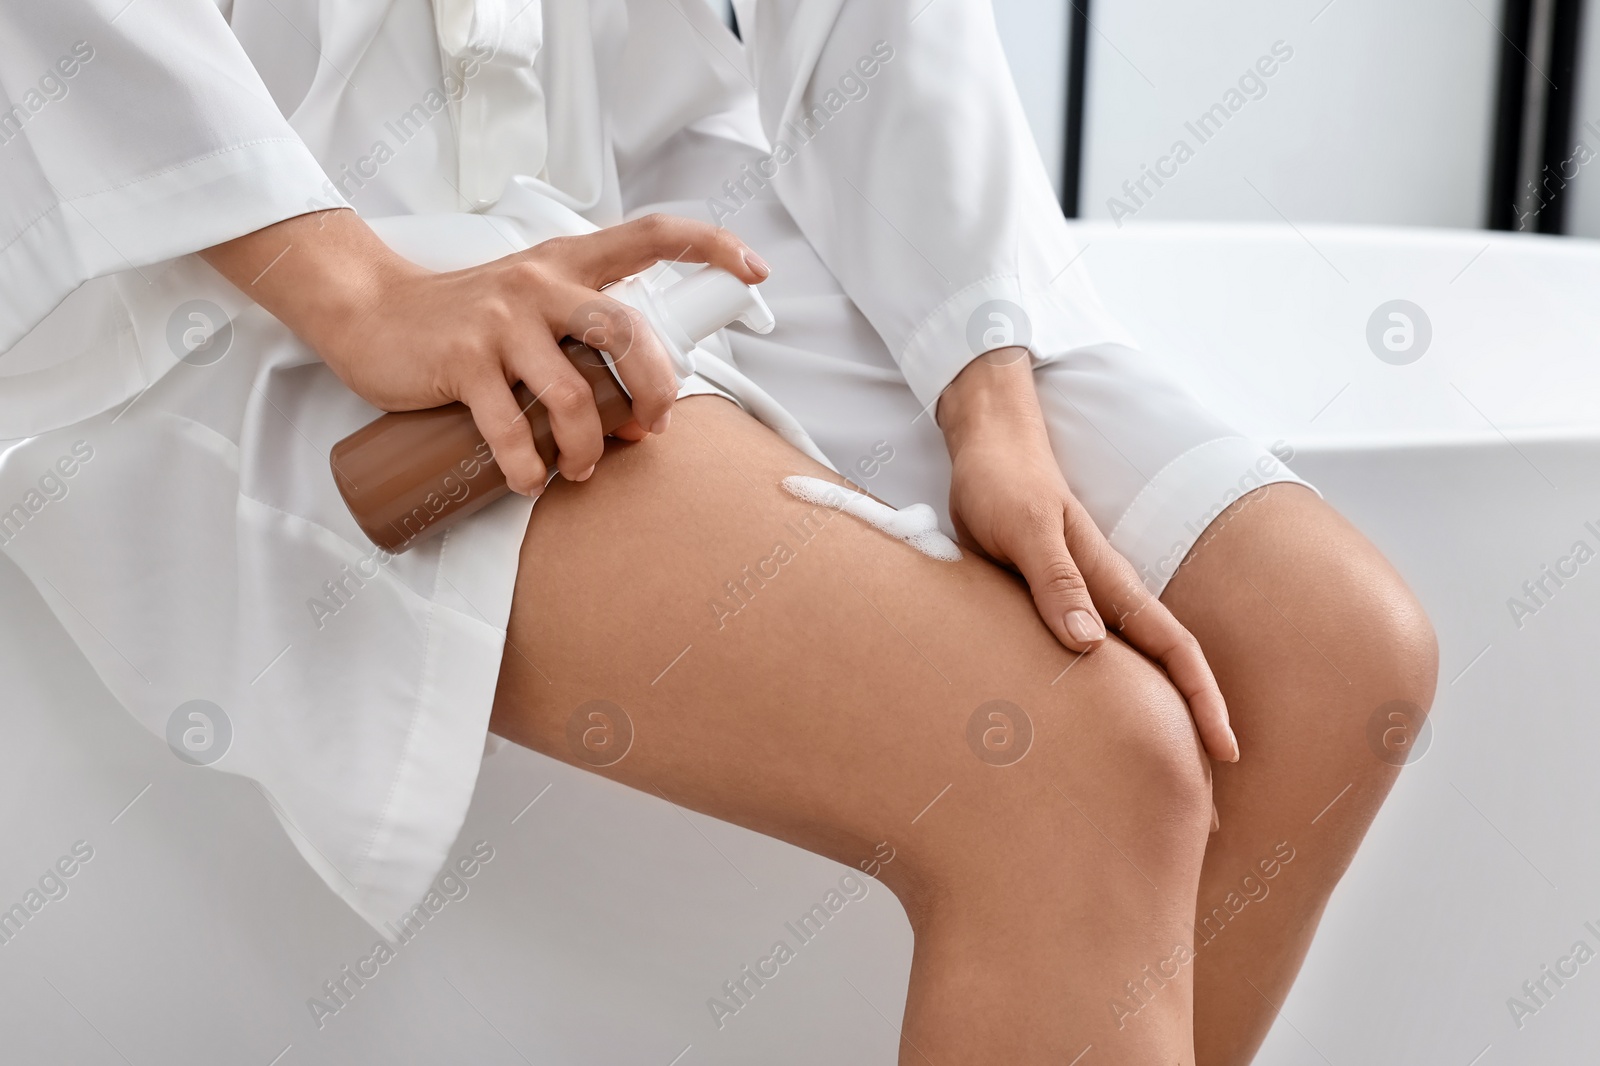 Photo of Woman applying self-tanning product onto her leg on tub in bathroom, closeup